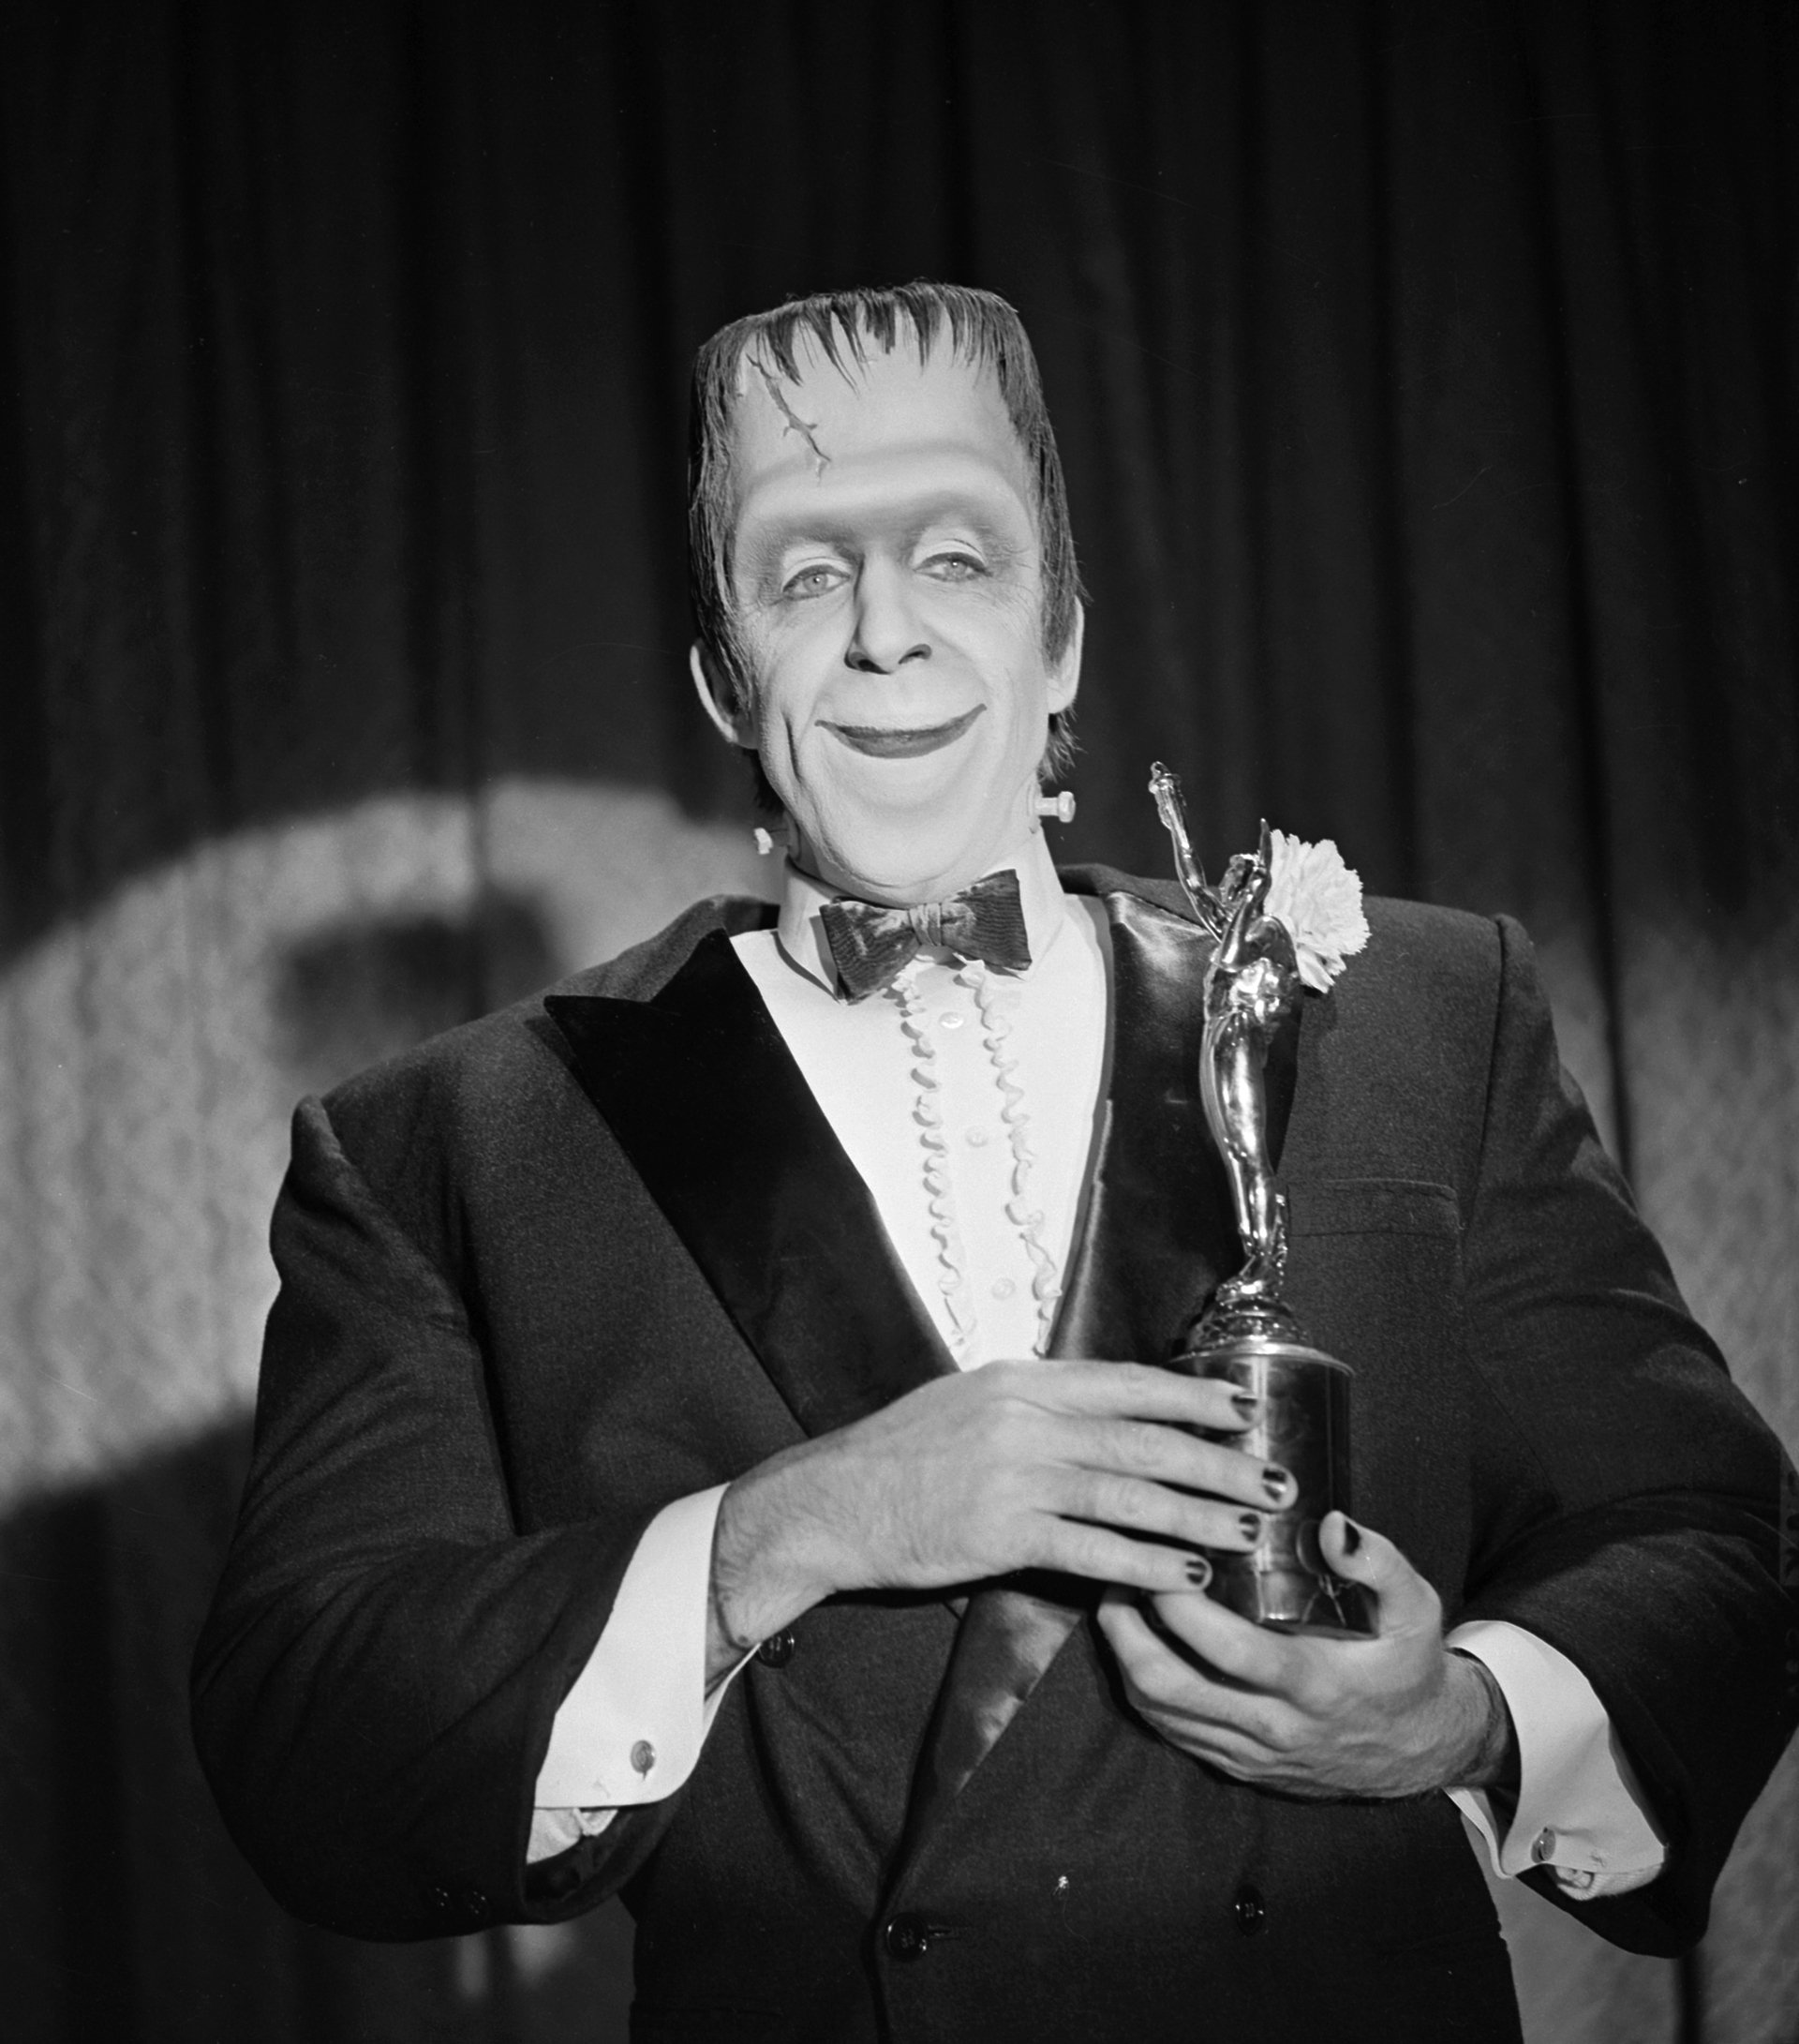 'The Munsters' star Fred Gwynne as Herman Munster dressed in a tuxedo.